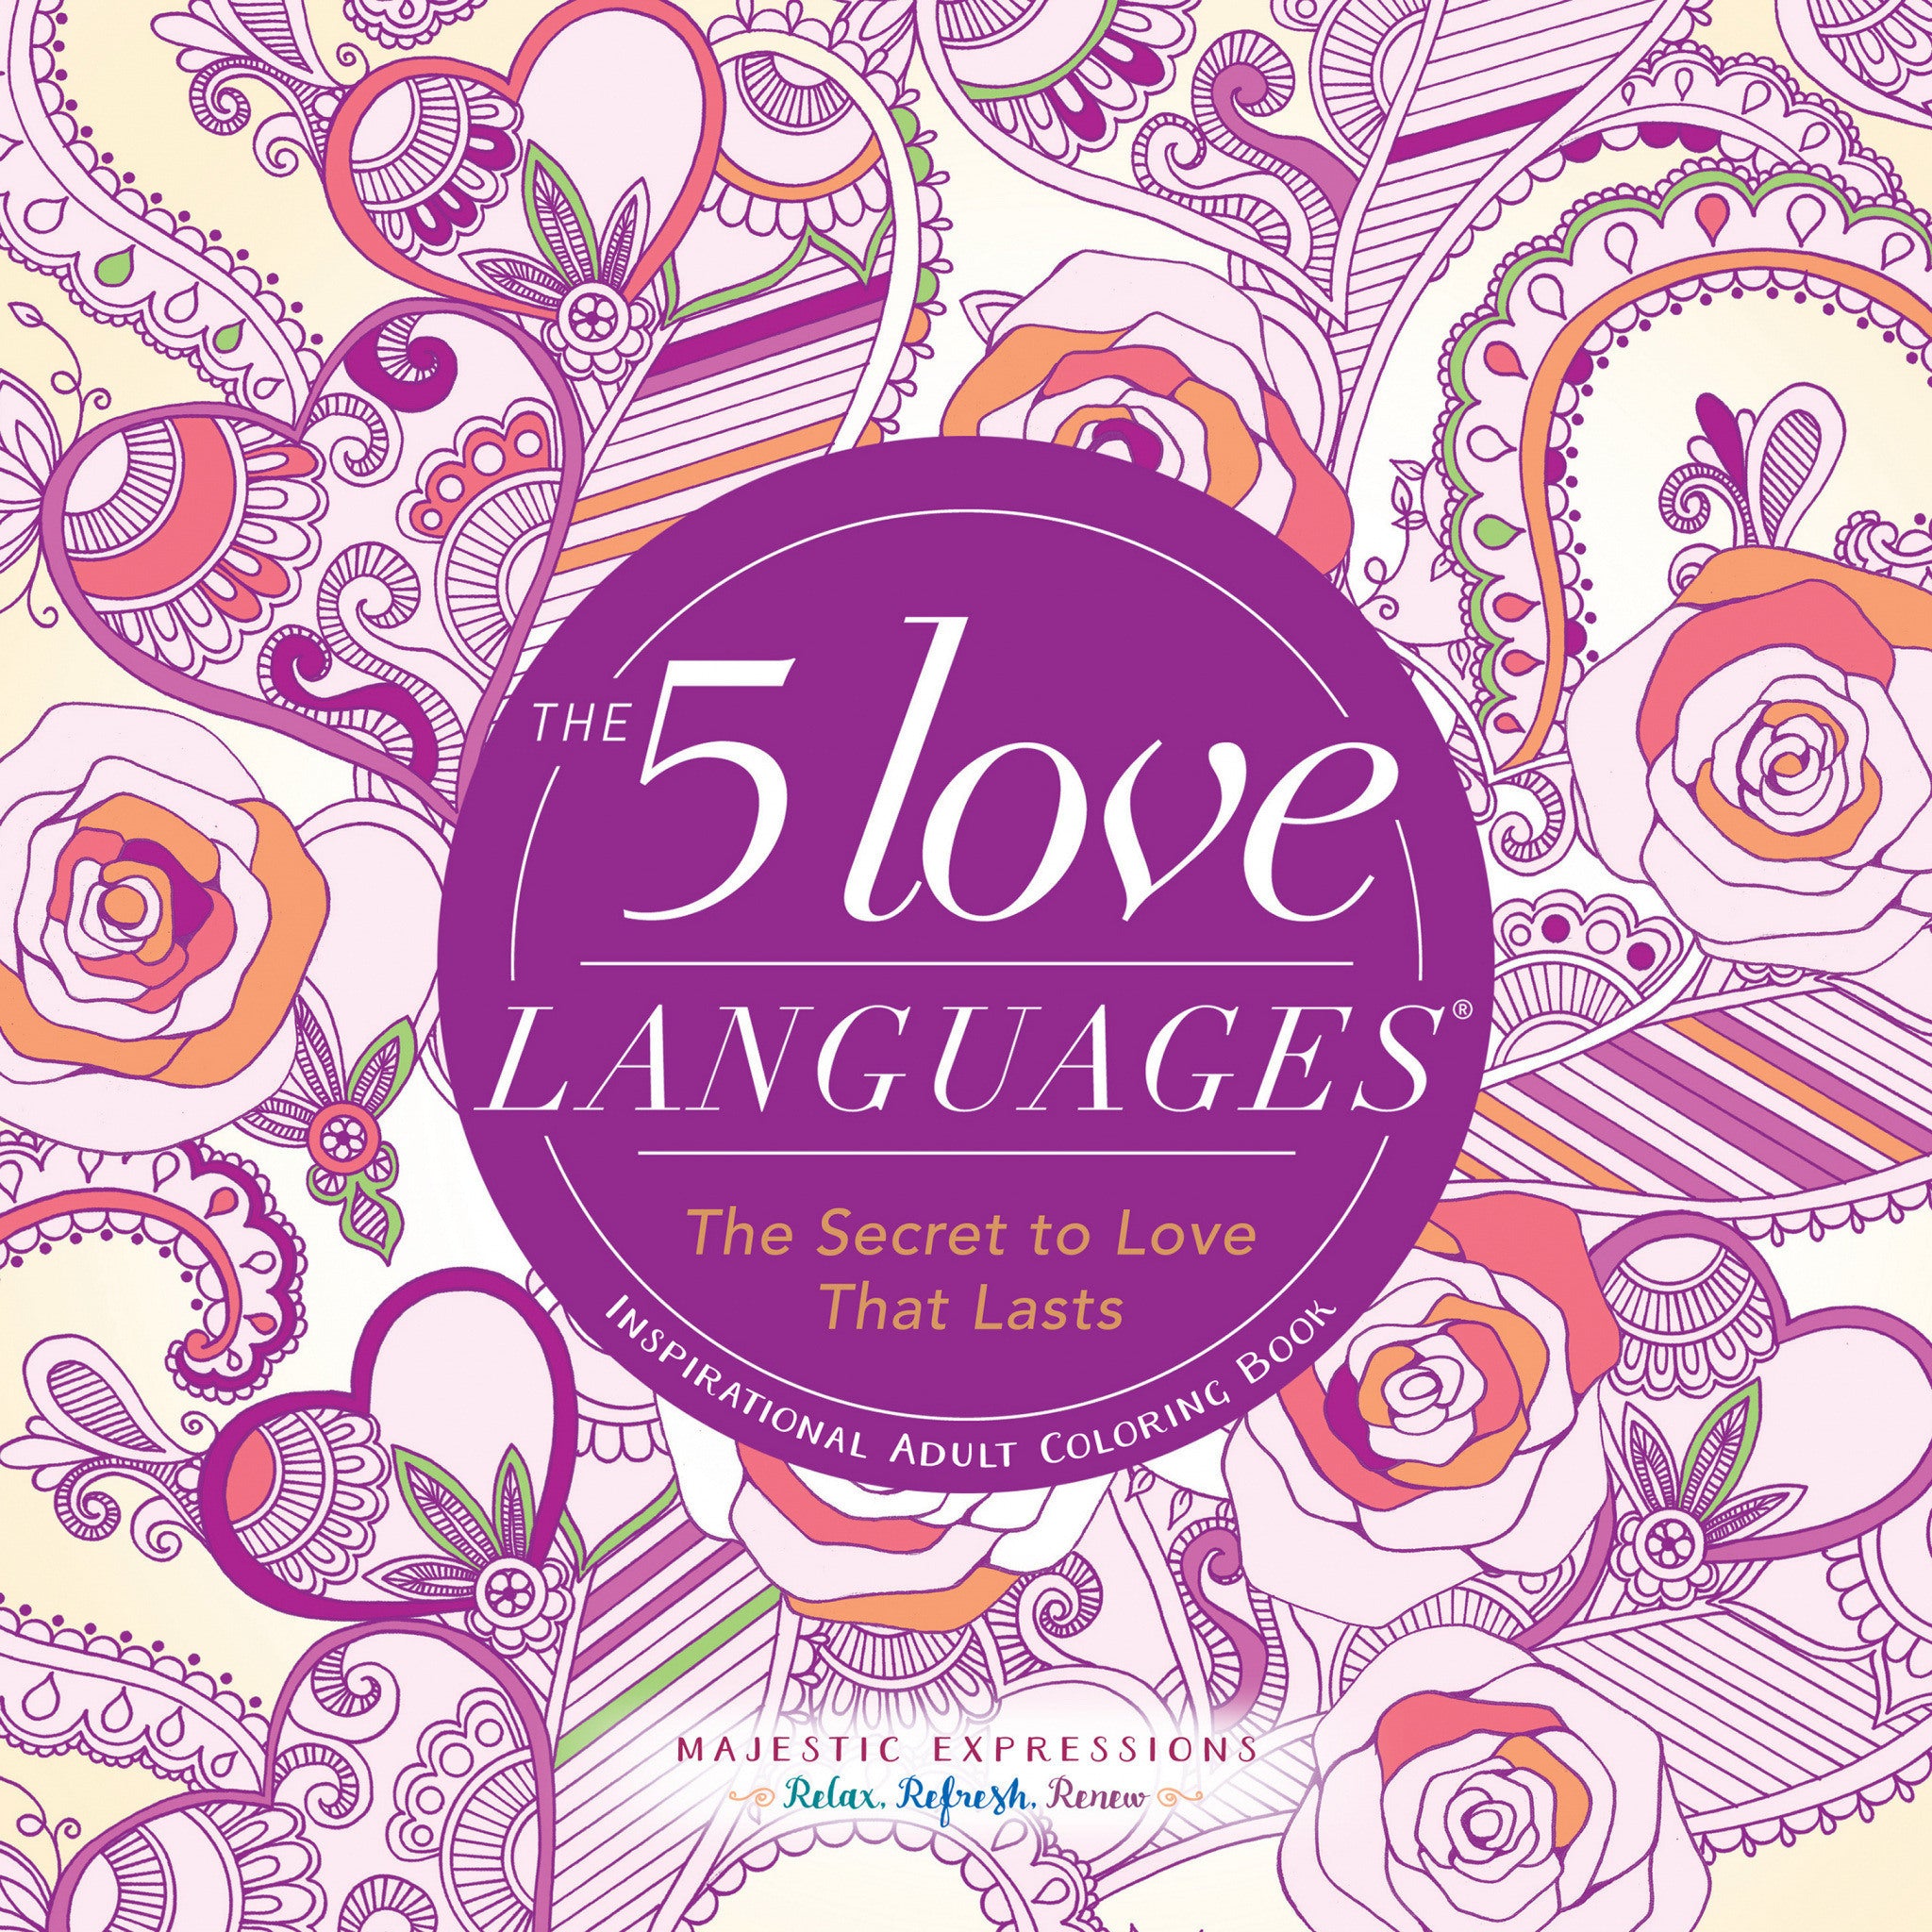 Image of 5 Love Languages Colouring Book other